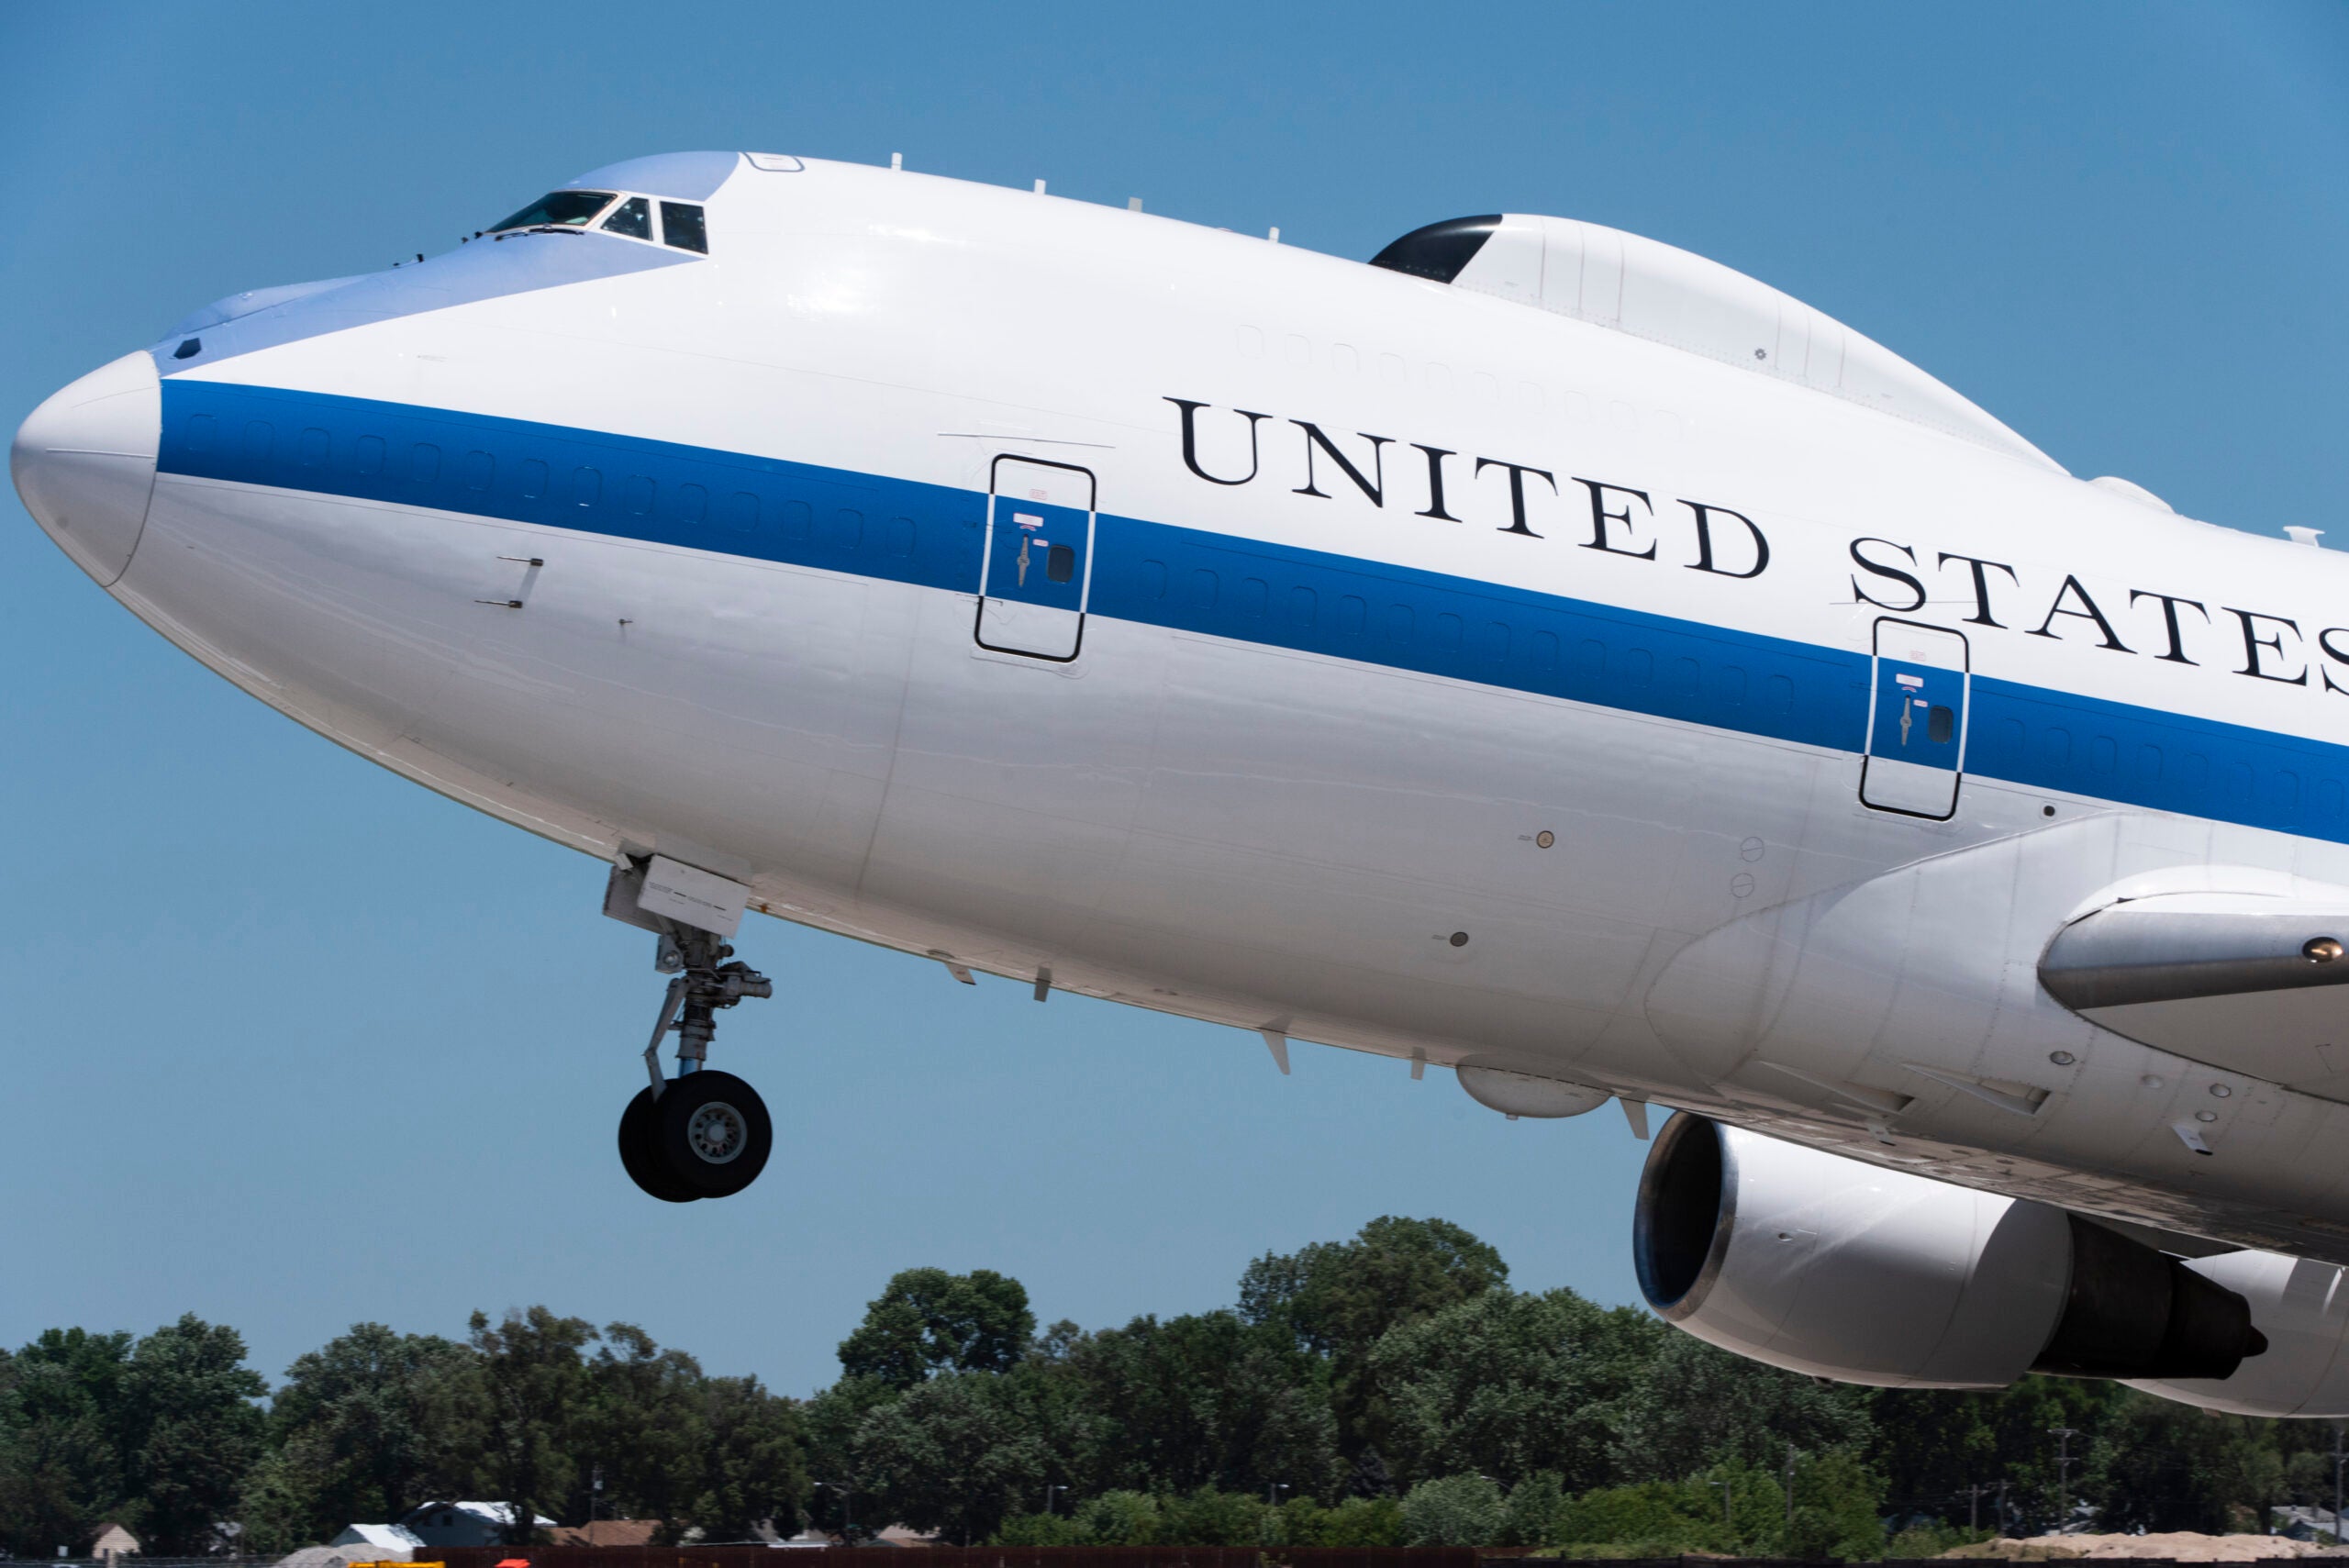 A U.S. Air Force E-4B National Airborne Operations Center aircraft takes off from Offutt Air Force Base, Nebraska, July 10, 2019. In case of a national emergency or destruction of ground command and control centers, the aircraft provides a highly survivable command, control and communications center to direct U.S. forces, execute emergency war orders and coordinate actions made by civil authorities. (U.S. Air Force photo by Staff Sgt. Jacob Skovo)